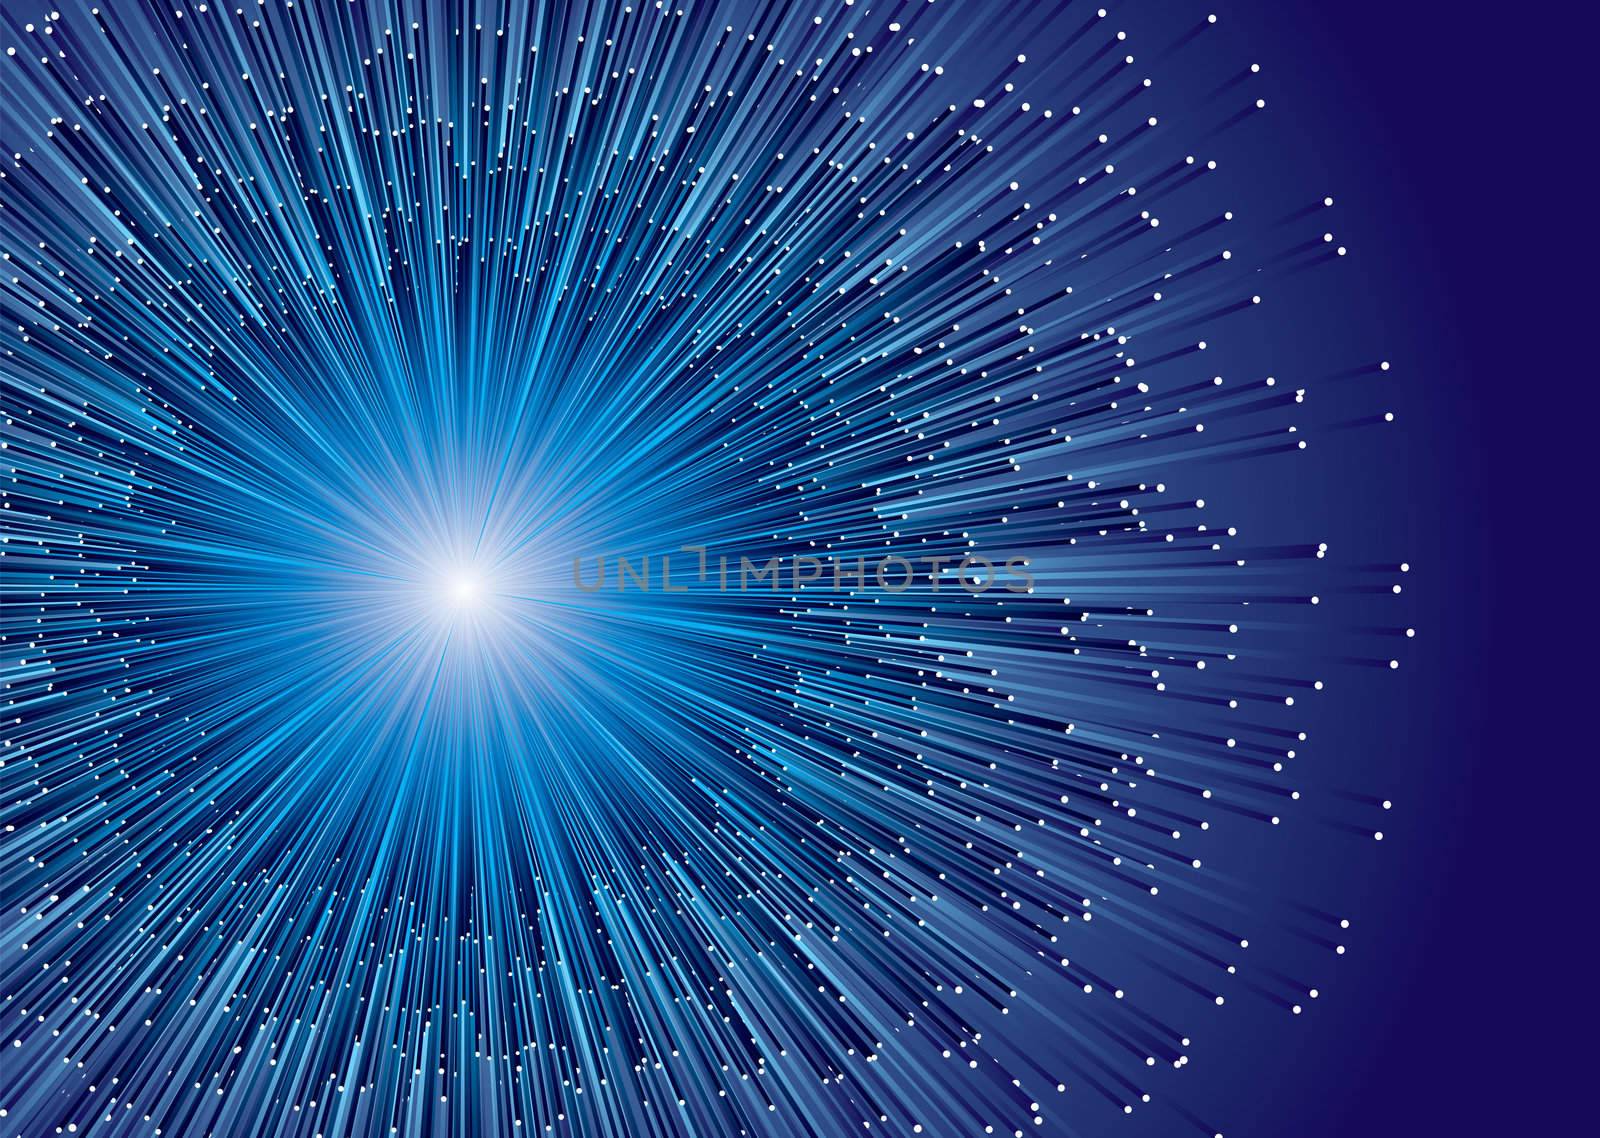 fiber optics illustrated background with an explosion of color